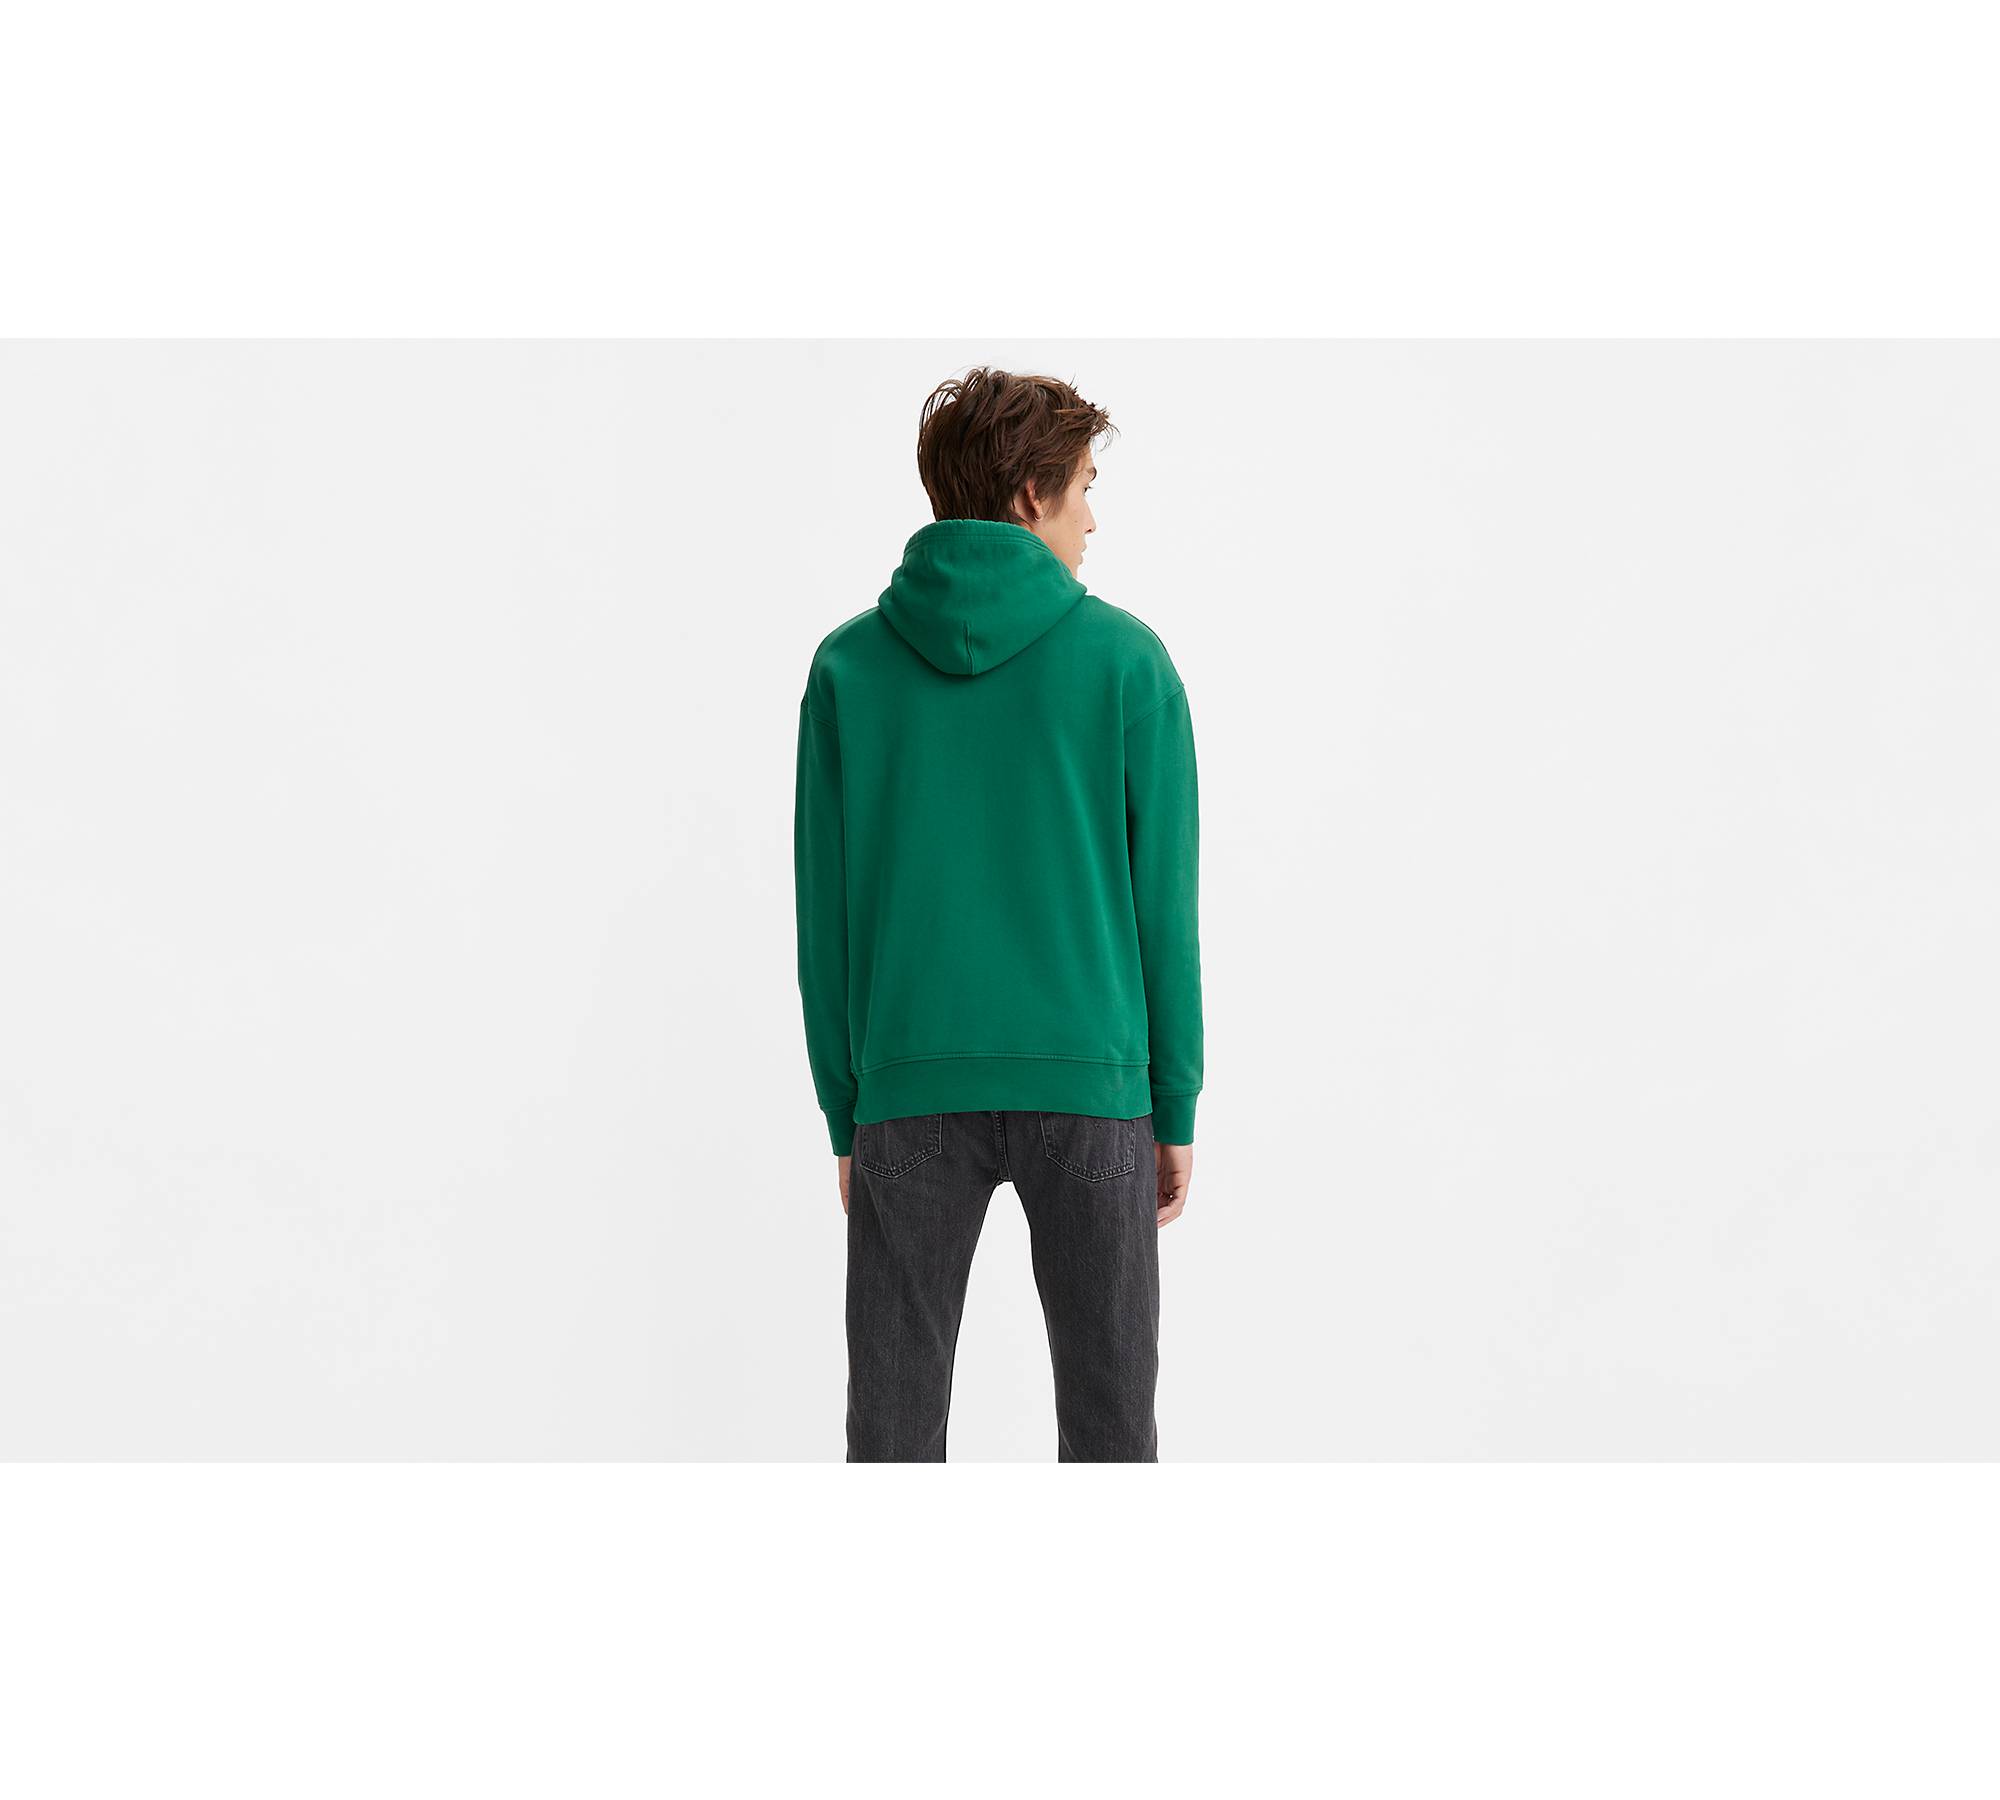 Levi's Big & Tall Relaxed Fit Graphic Pullover Hoodie In Evergreen